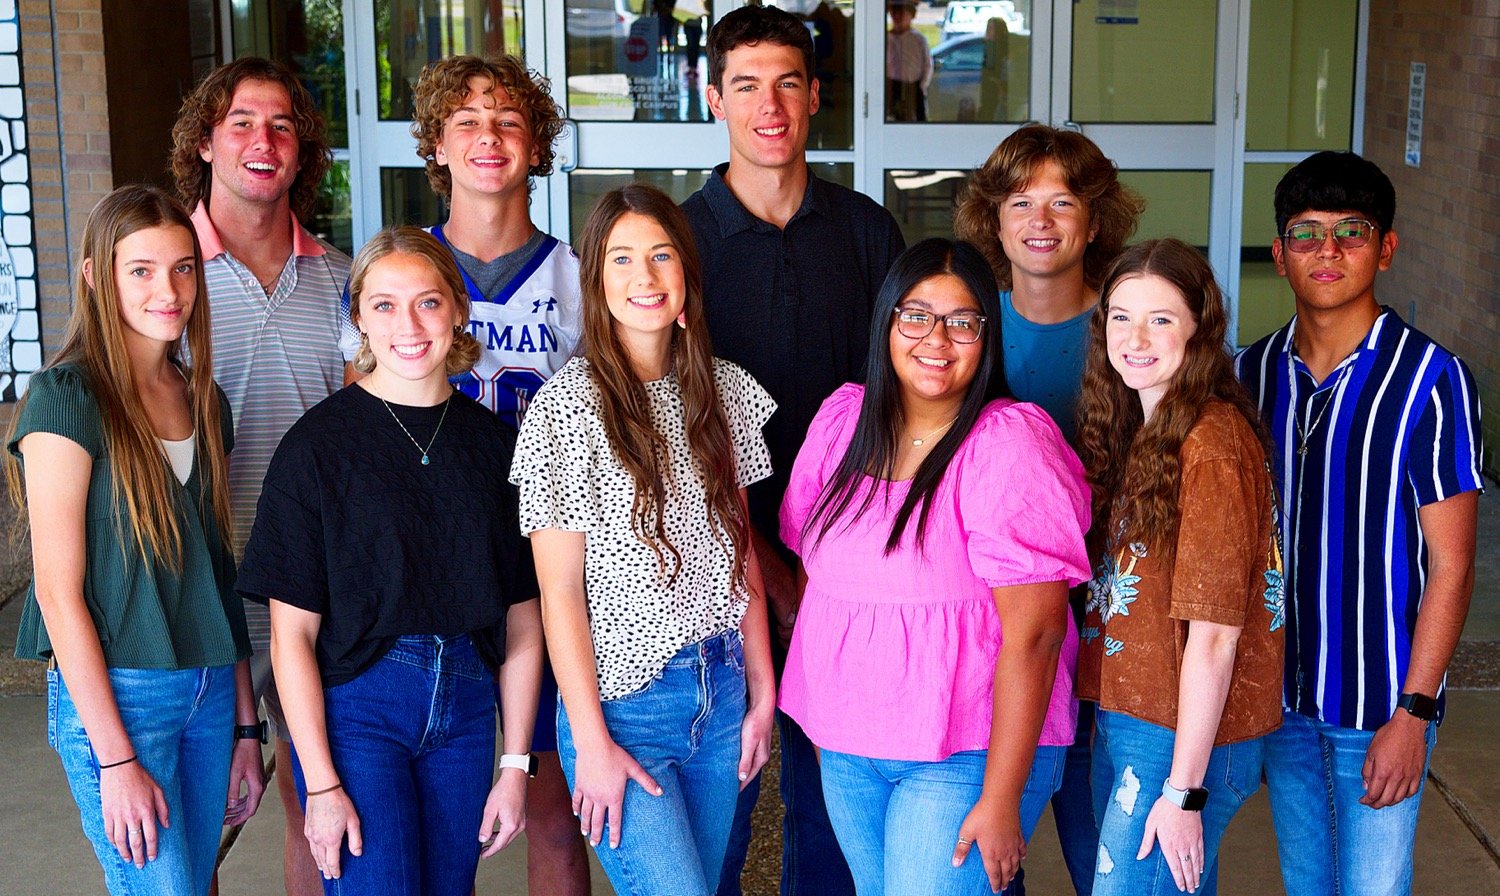 Quitman homecoming king nominees, in the back row, from left to right, are Carson Dickens, Brady Floyd, Ethan Presley, Brandon Hayesm and Gustavo Olvera. Homecoming queen nominees, in front, are Sarah Smith, Savana Smith, Kameran Farnham, Jennifer Castillo and Sierra Williams. The king and queen will be crowned next Friday before the football game against Edgewood.